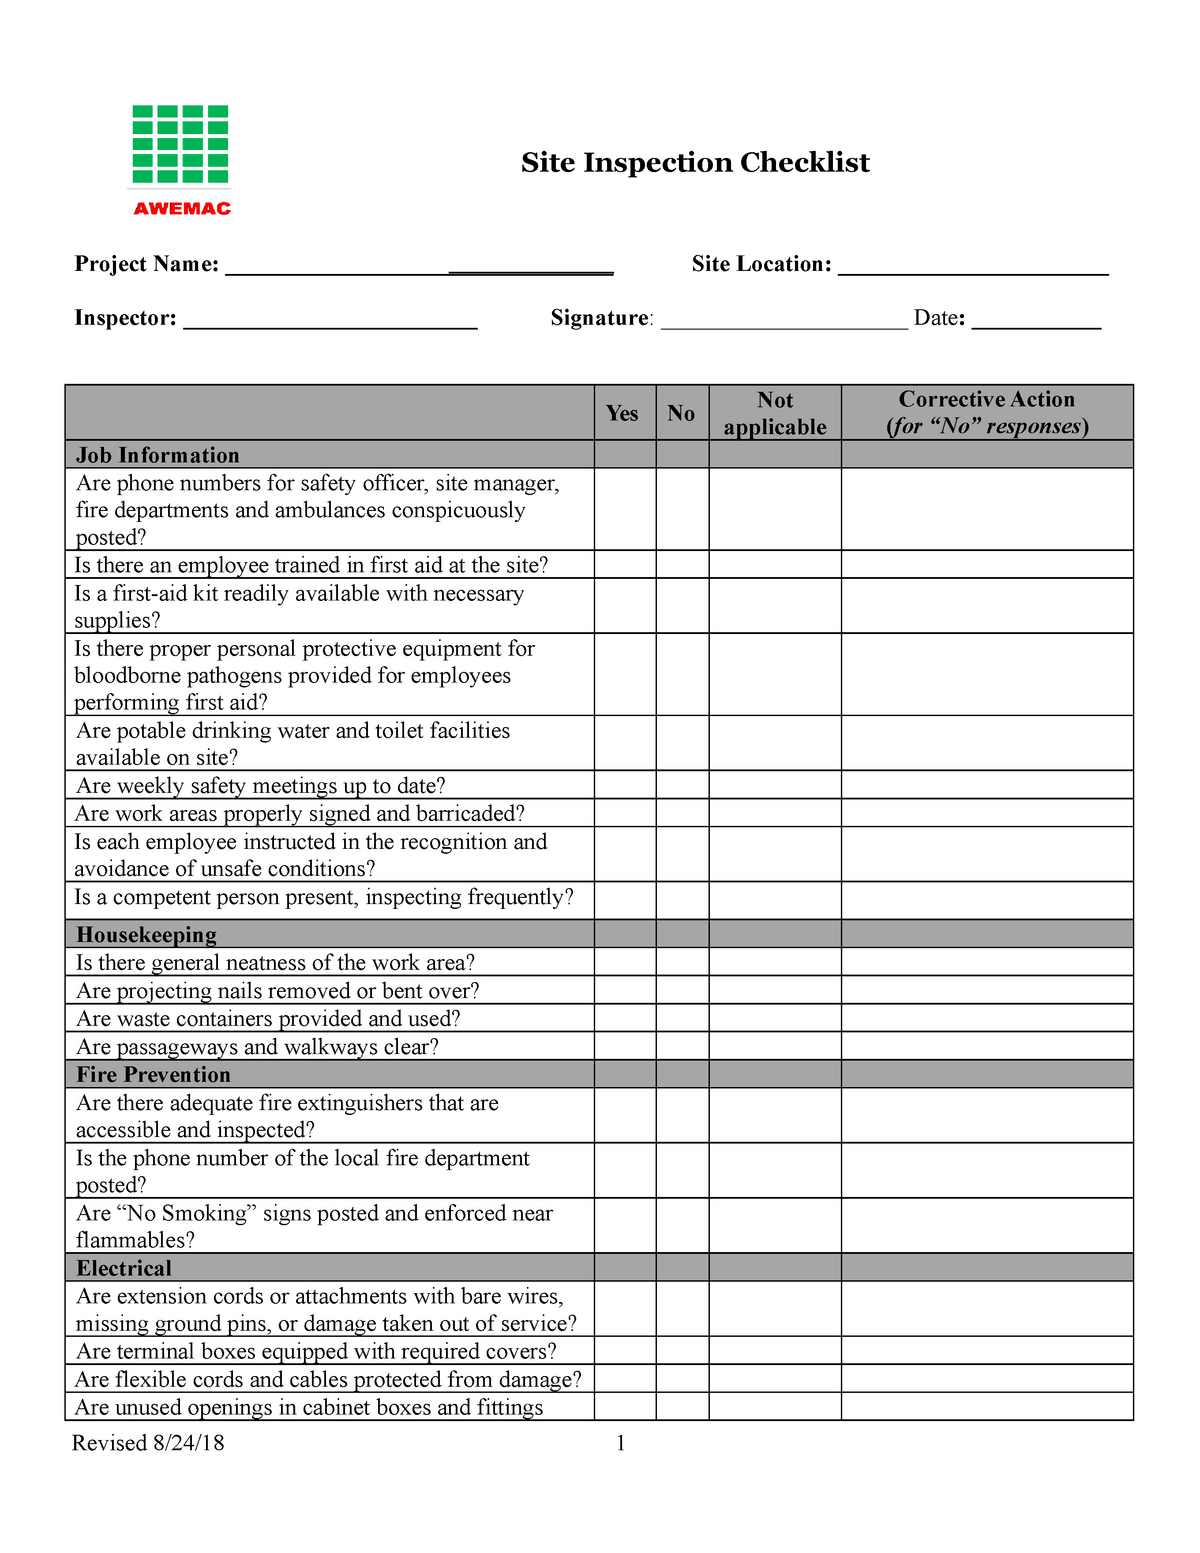 Construction safety inspection checklist long - Site Inspection ...